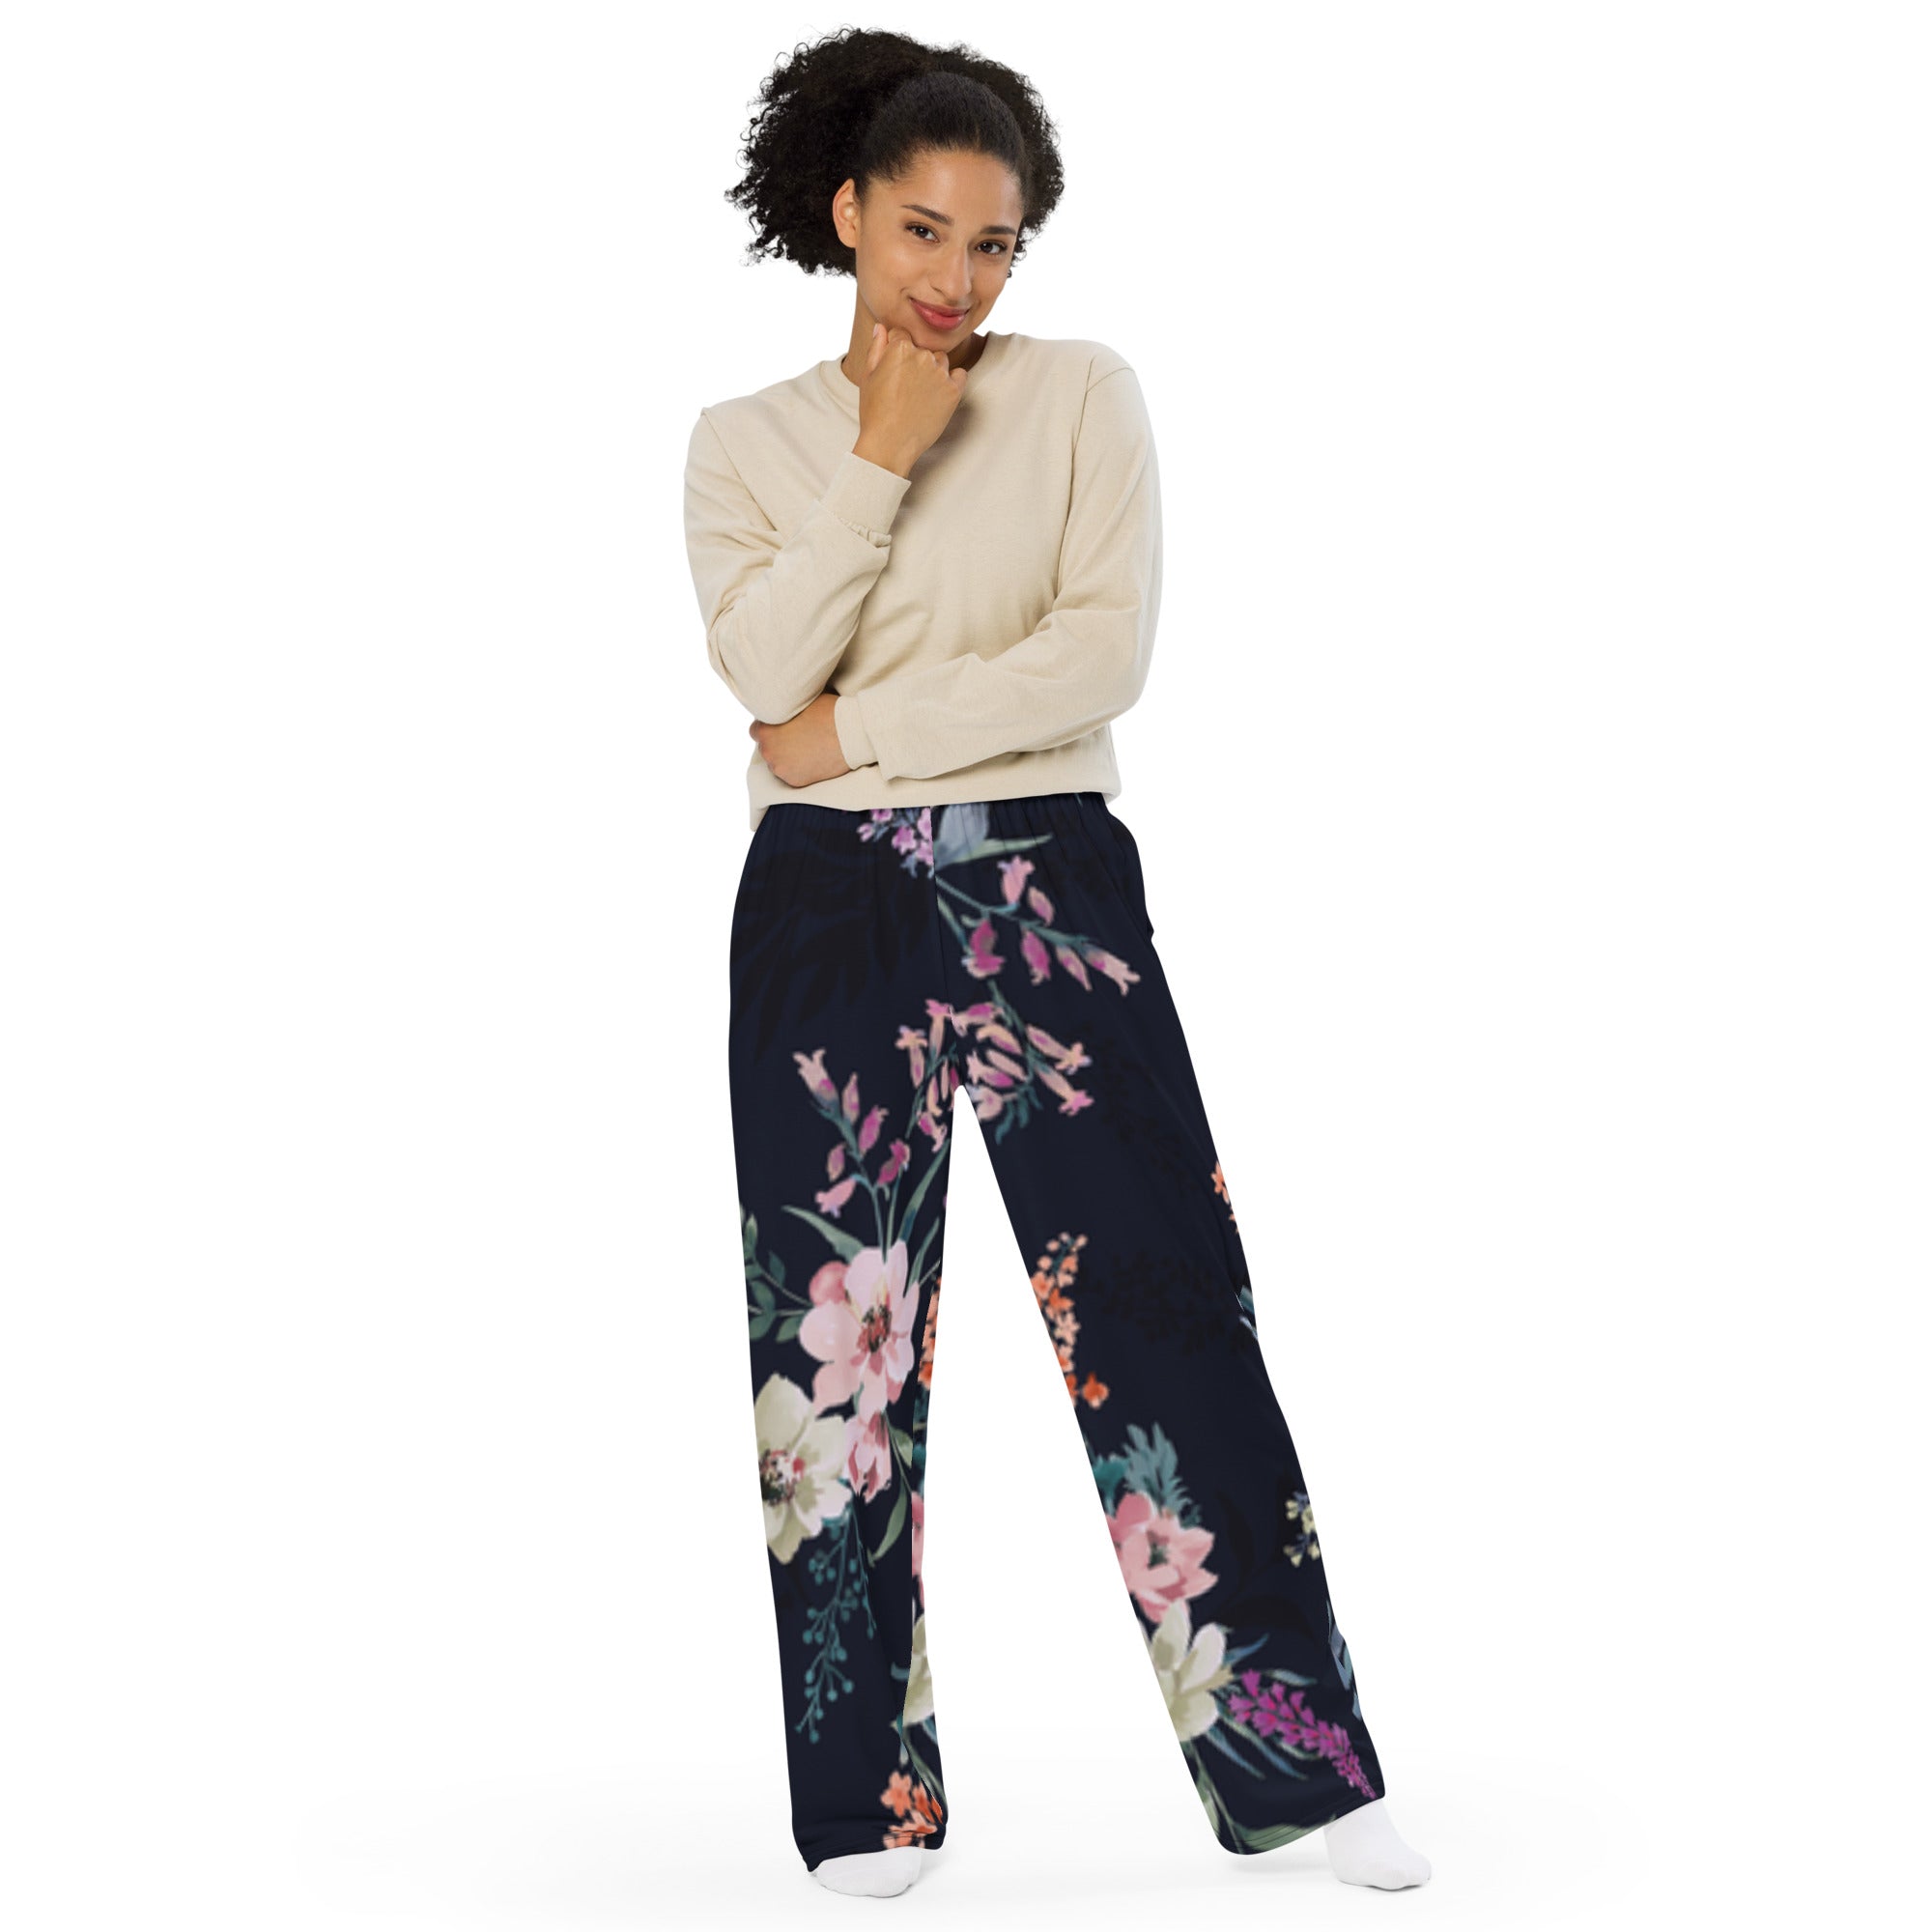 All-over Flower Printed Bottoms